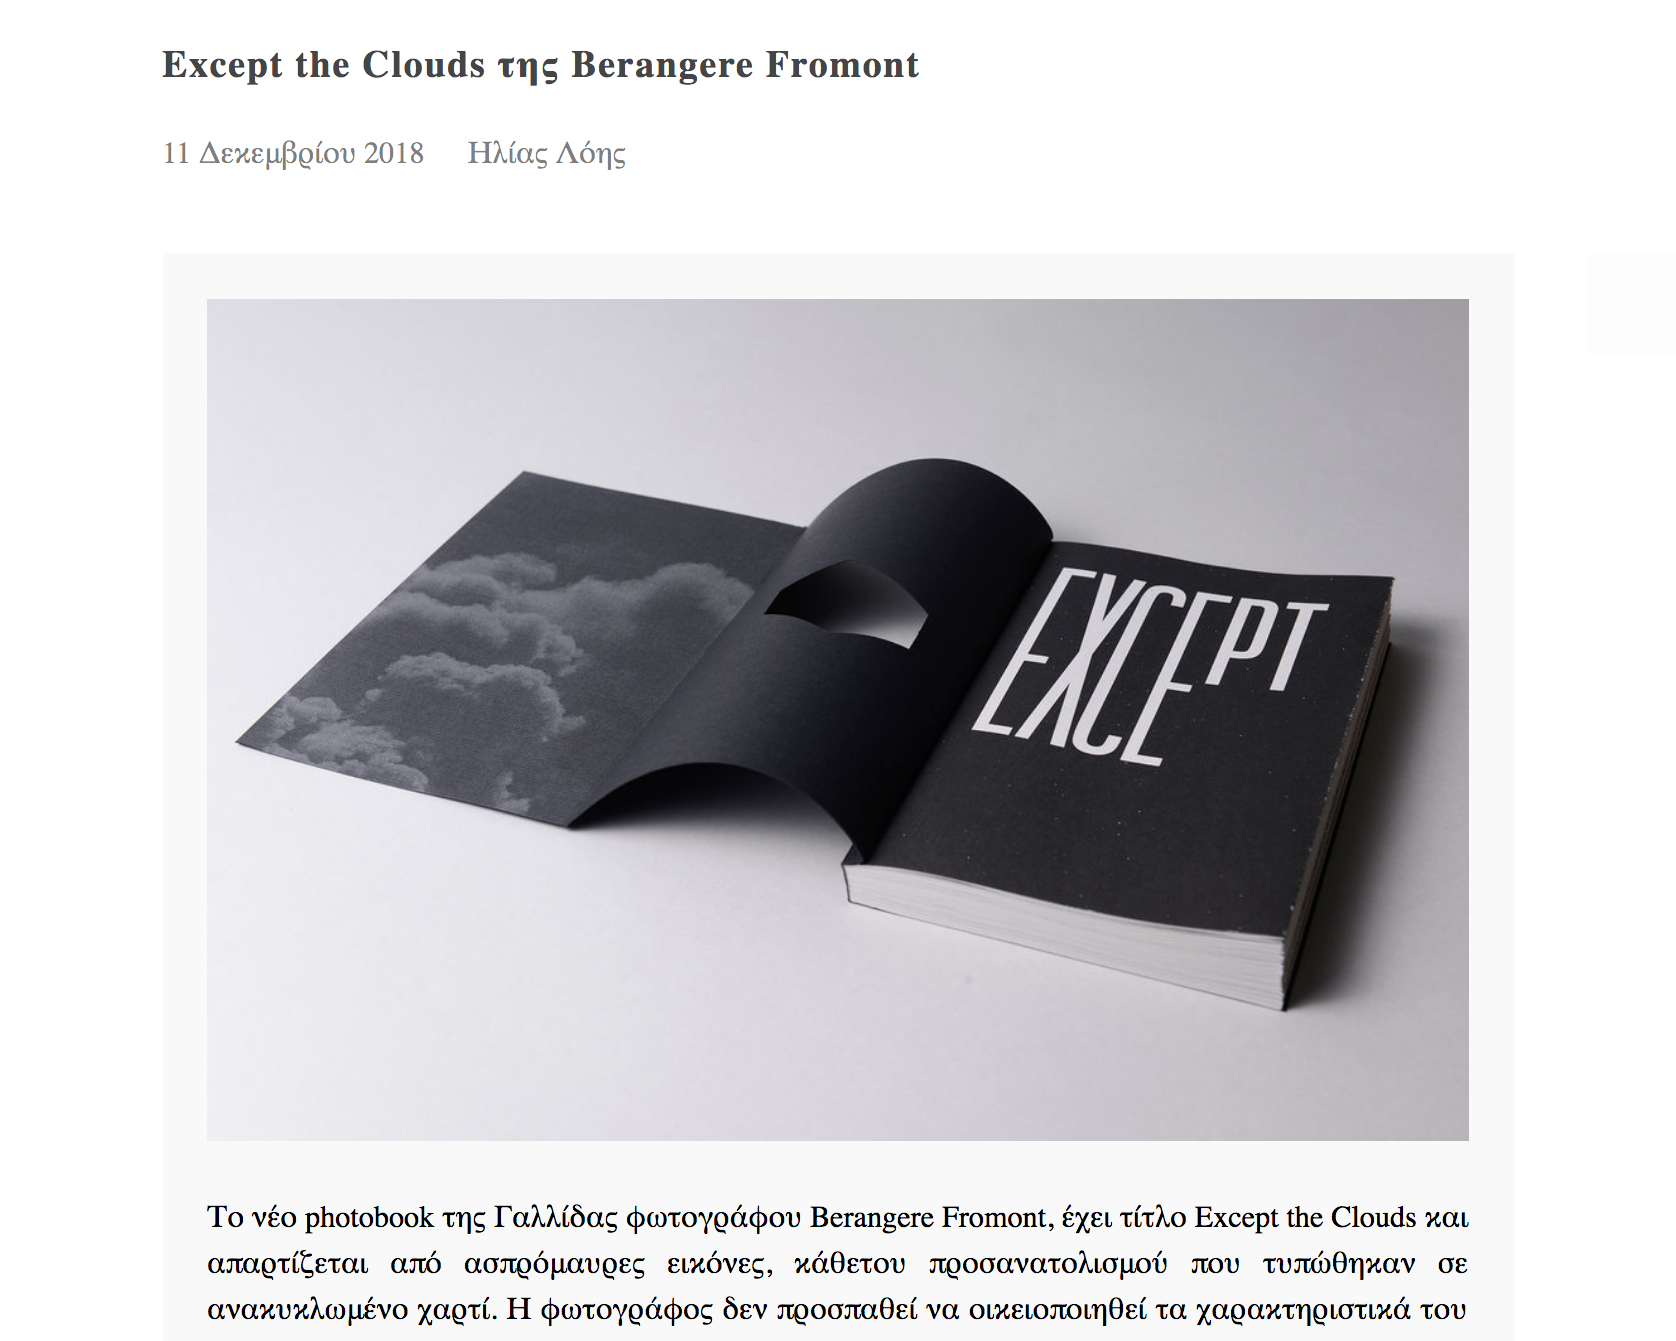 Critical review on Except the Clouds of Berangere Fromont